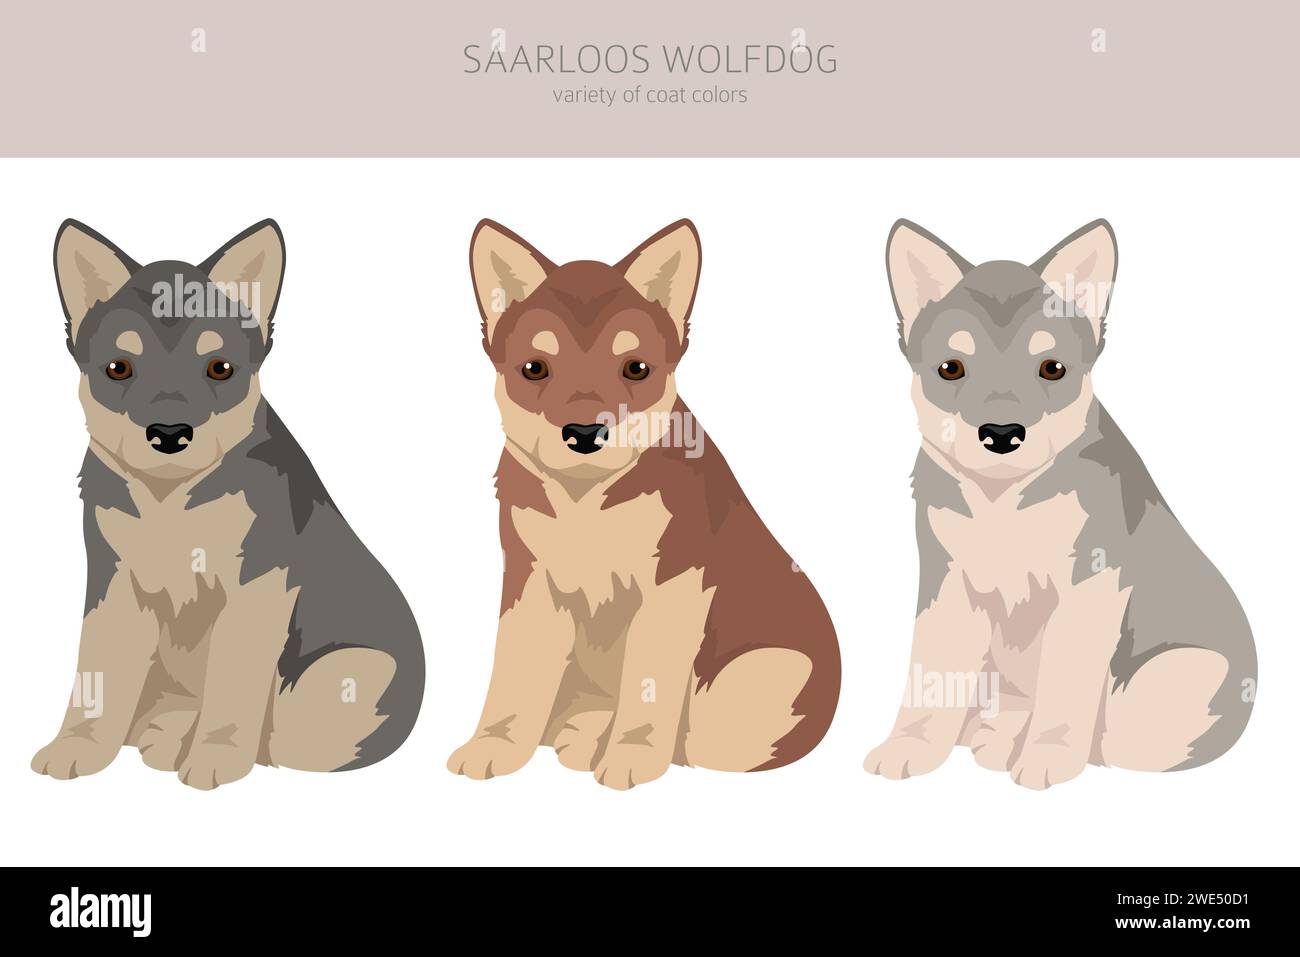 Saarloos Wolfdog puppies clipart. All coat colors set.  All dog breeds characteristics infographic. Vector illustration Stock Vector